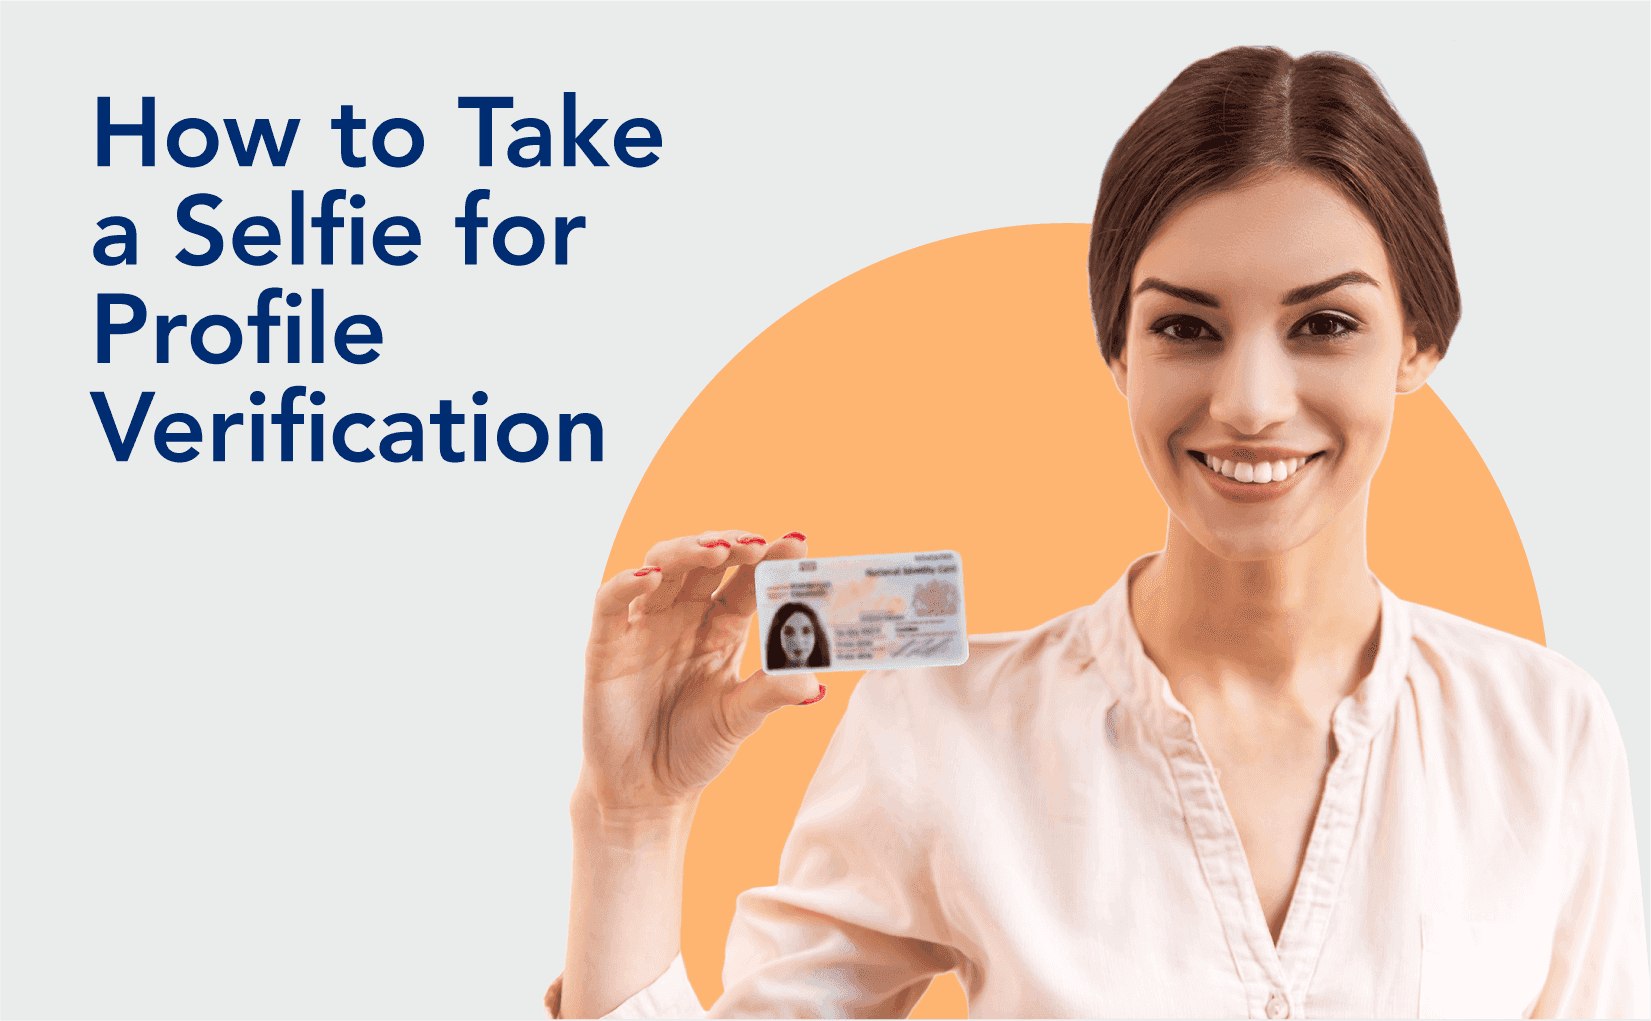 How to Take a Selfie for Profile Verification